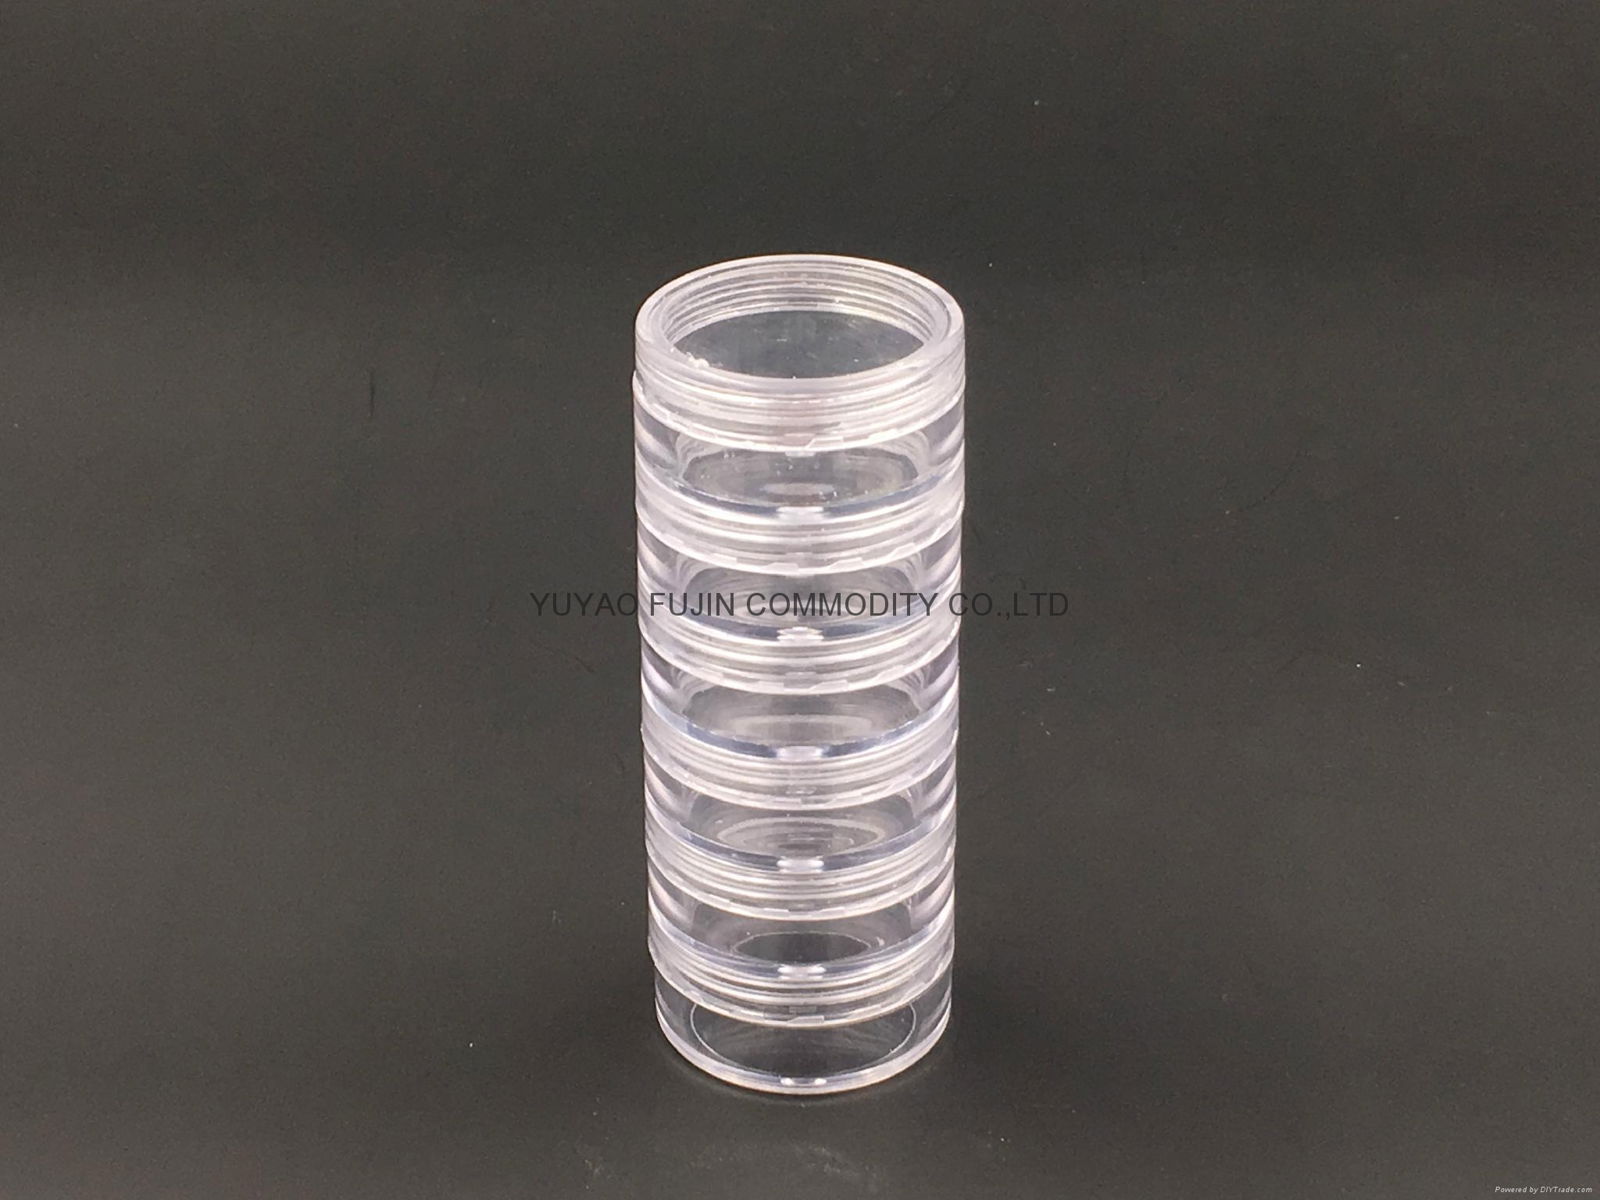 10ml multilayer comsmetic jar for eye shadow/make up/colorful pressed face powde